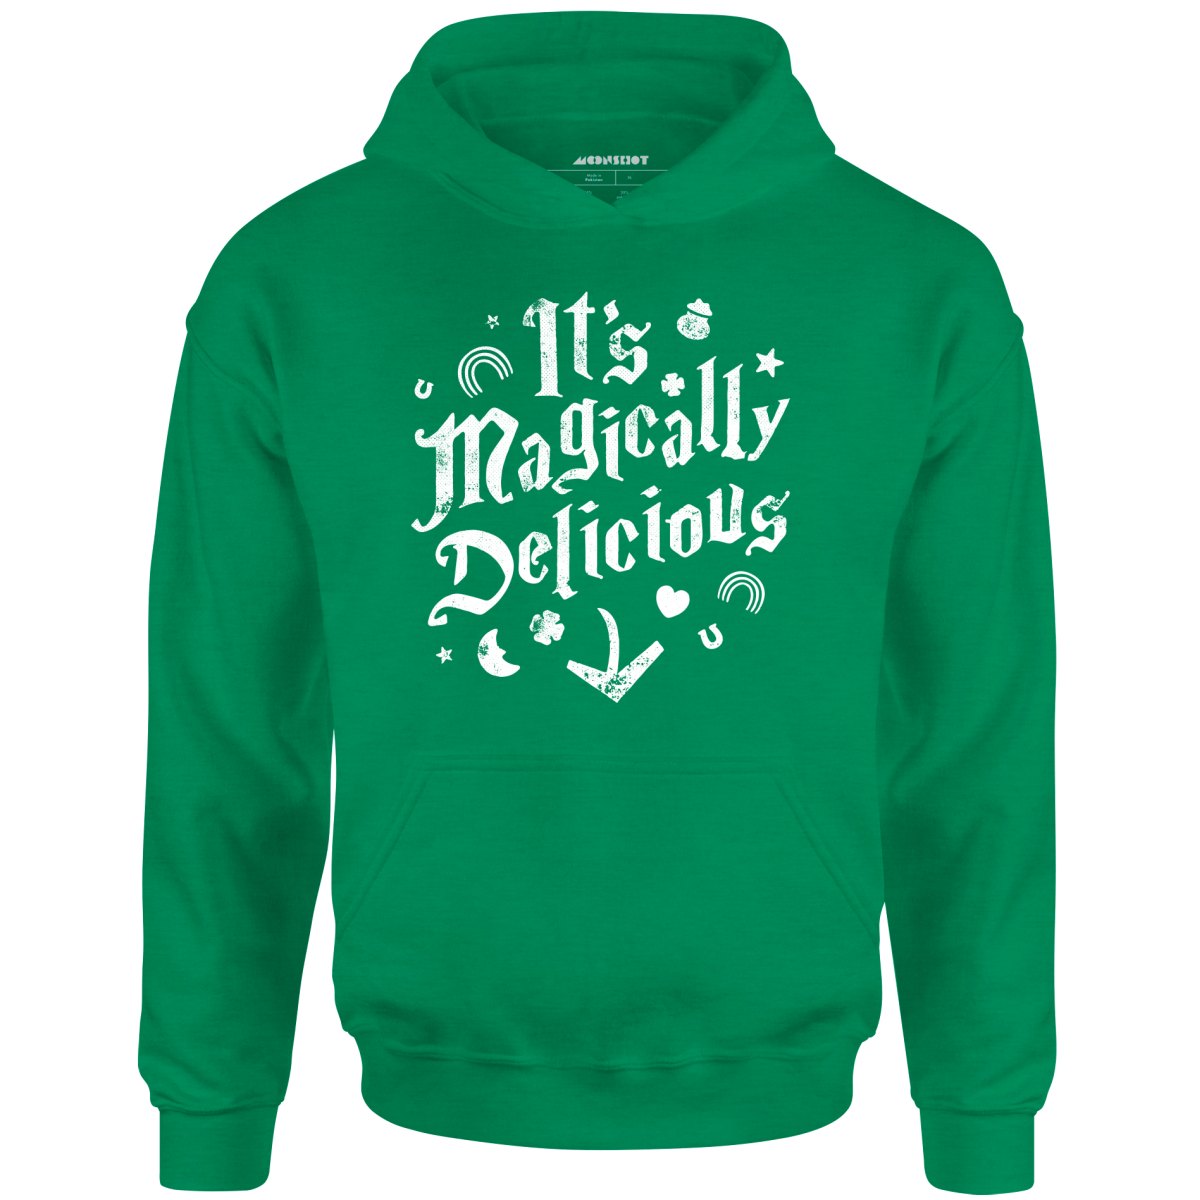 Magically Delicious - Unisex Hoodie